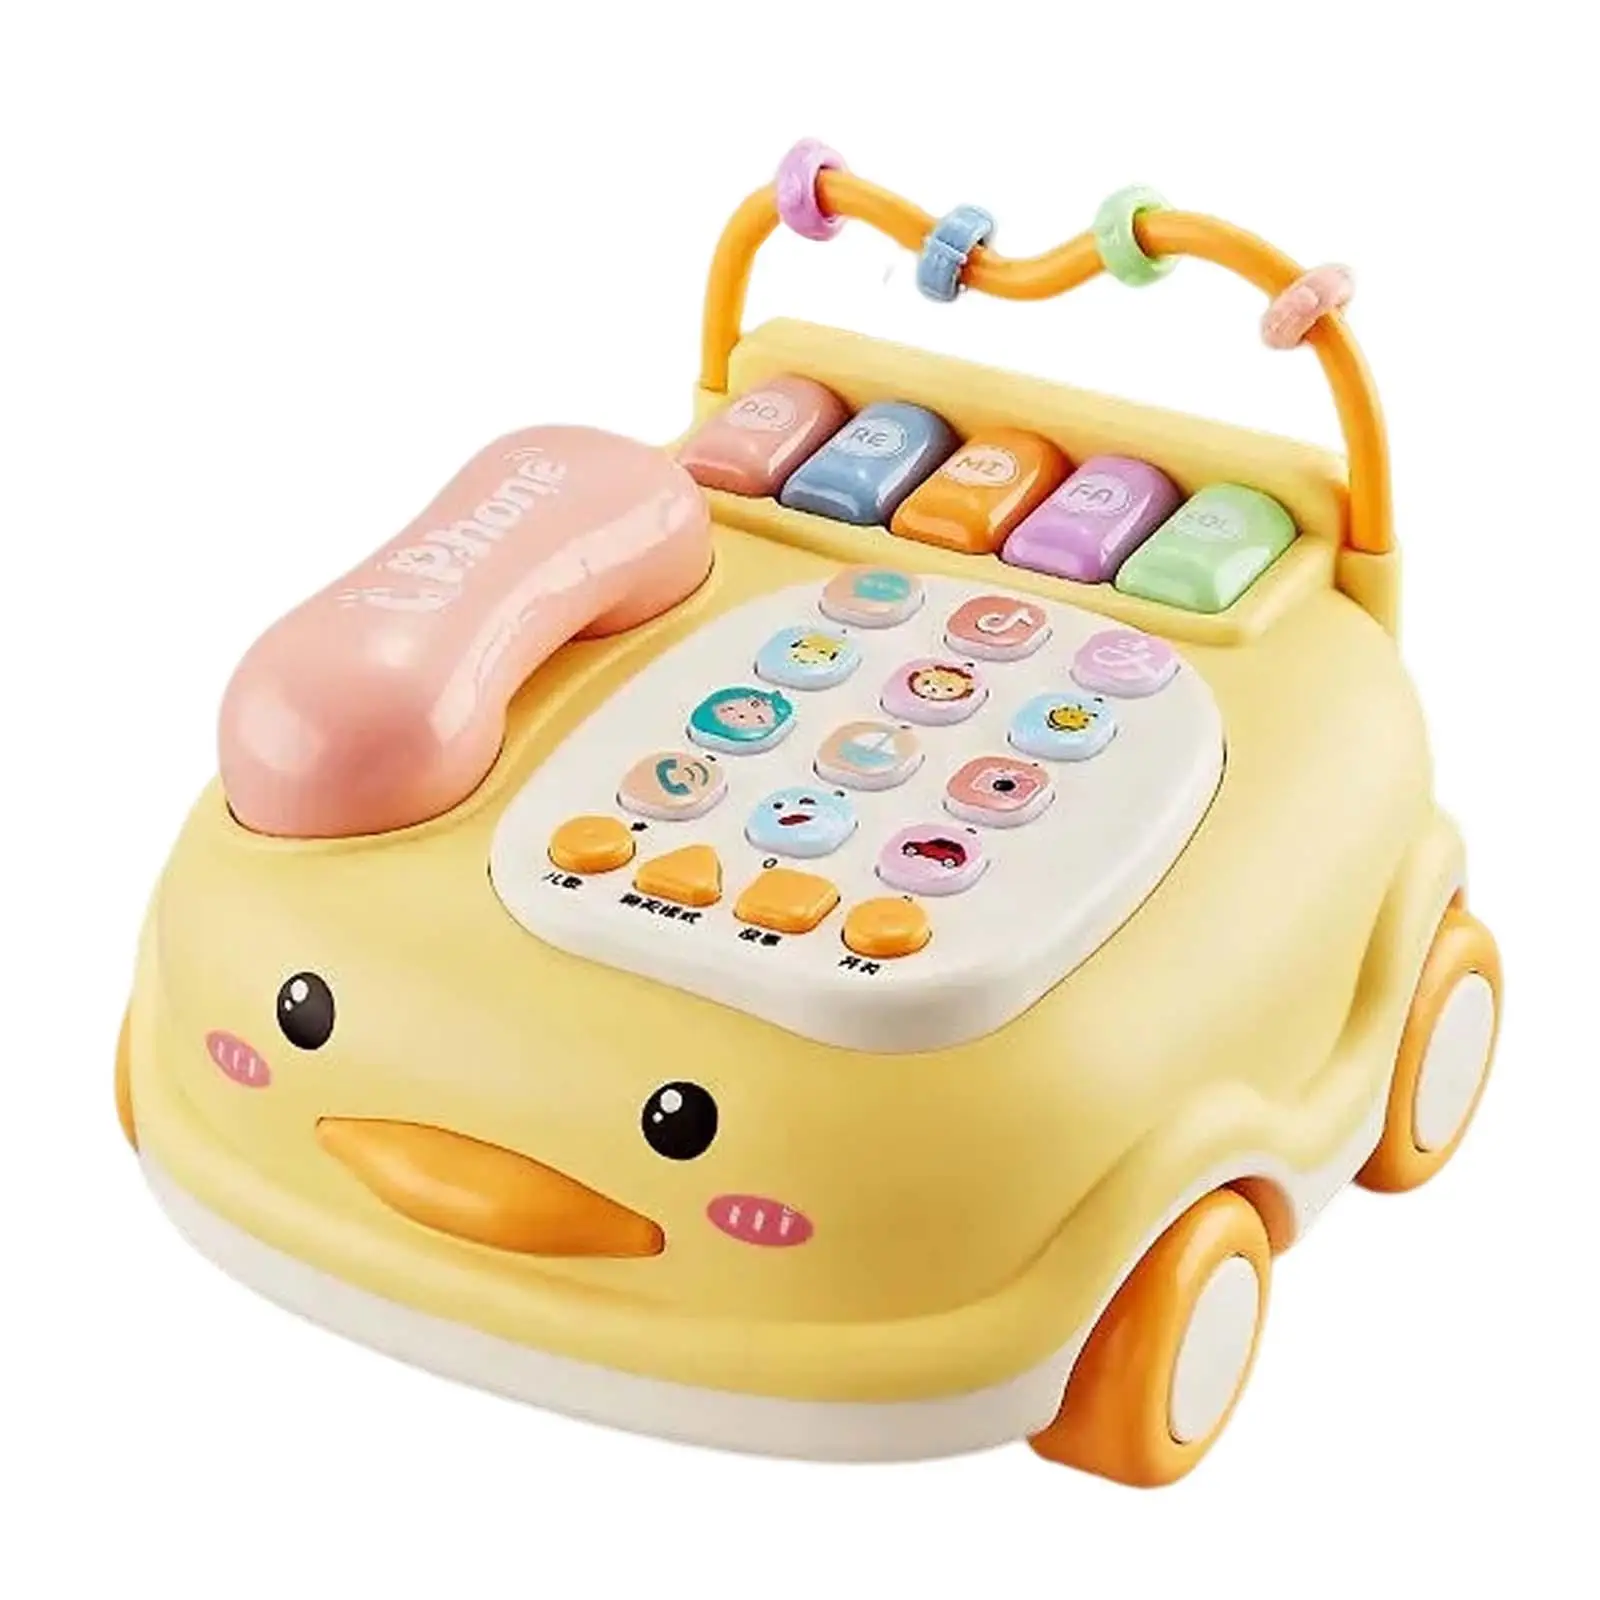 Baby Educational Learning Toy Pretend Phone Cognitive Development Toy Baby Toy Phone for Creative Gift Children 3 Years Old Girl